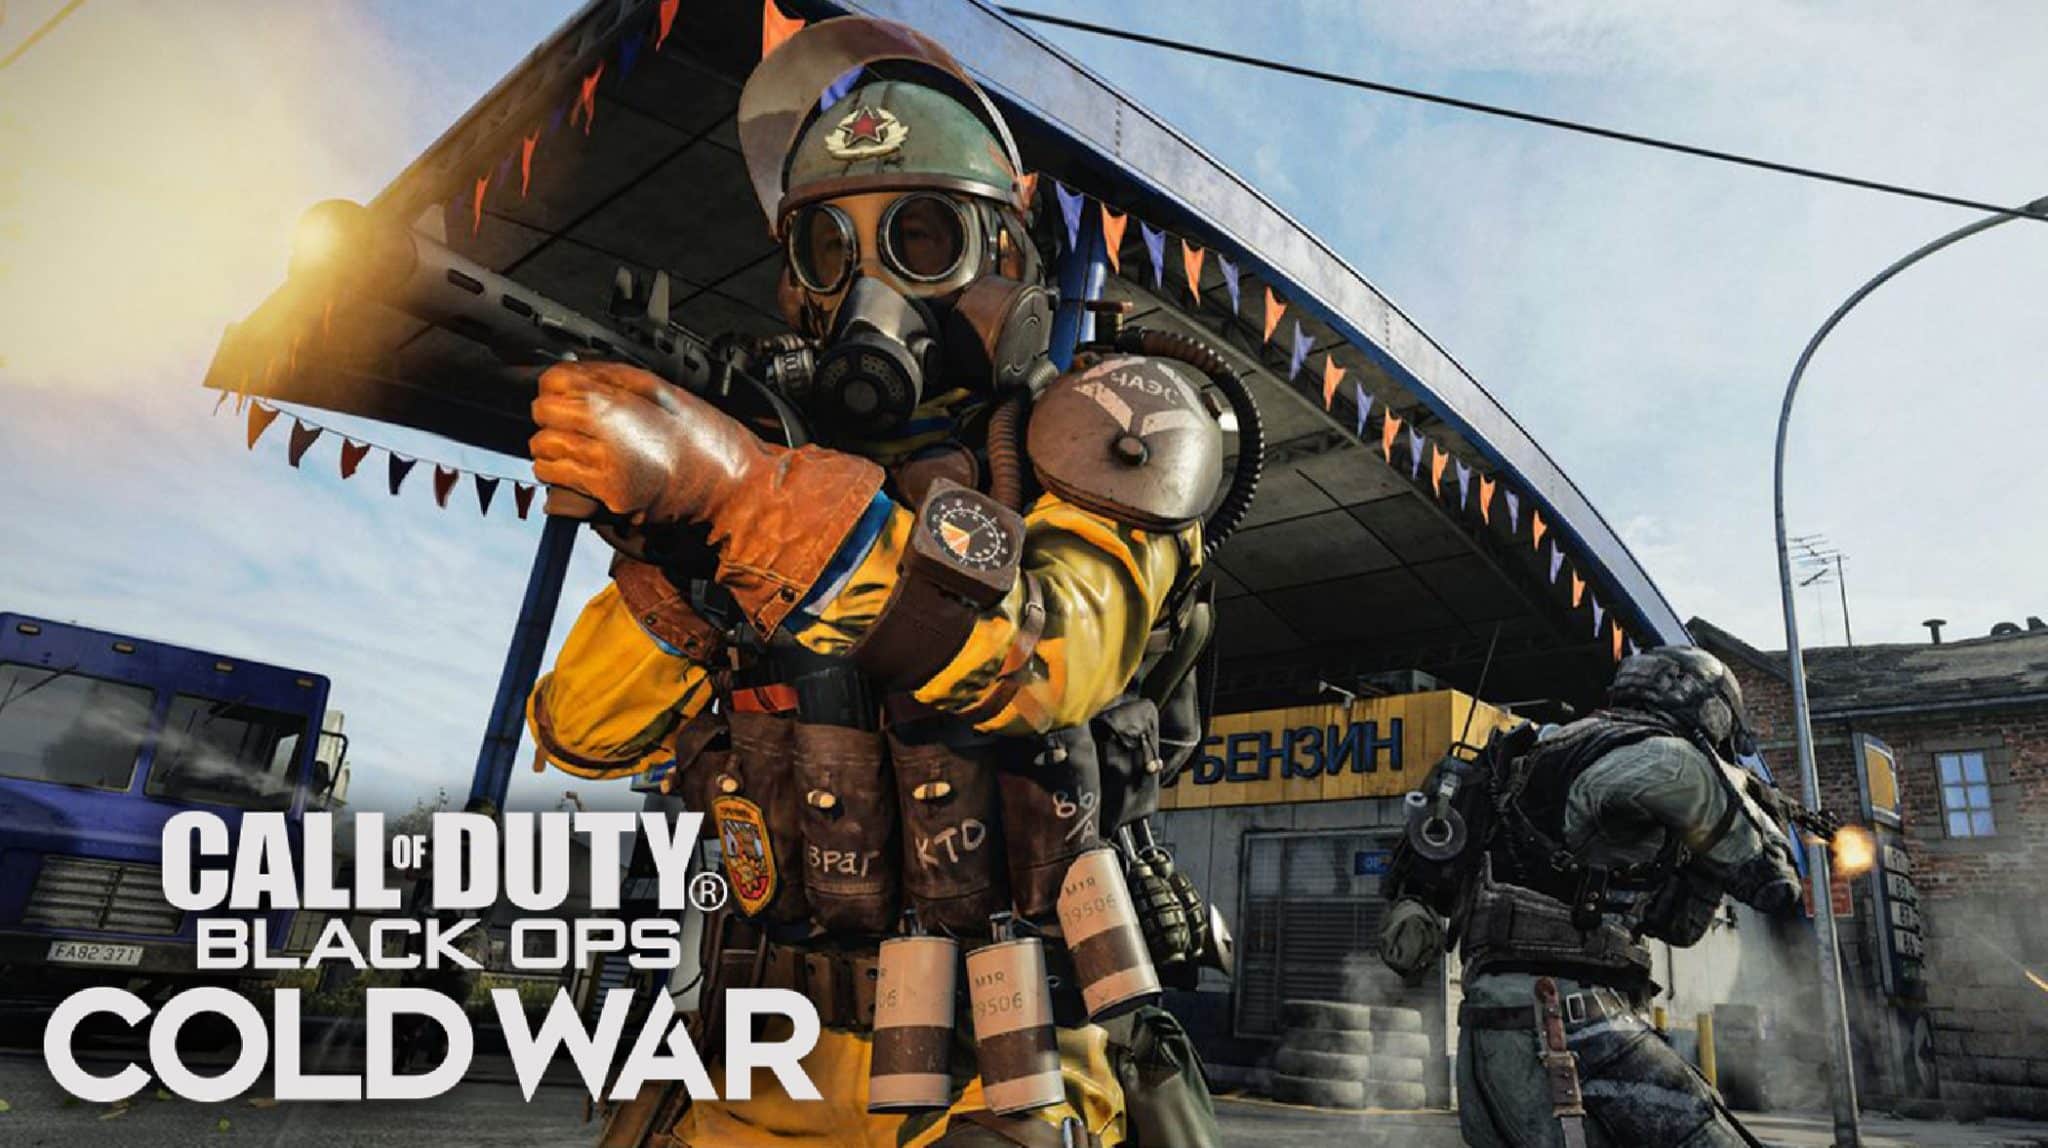 New Black Ops Cold War content announced: Classic CoD map, Warzone 